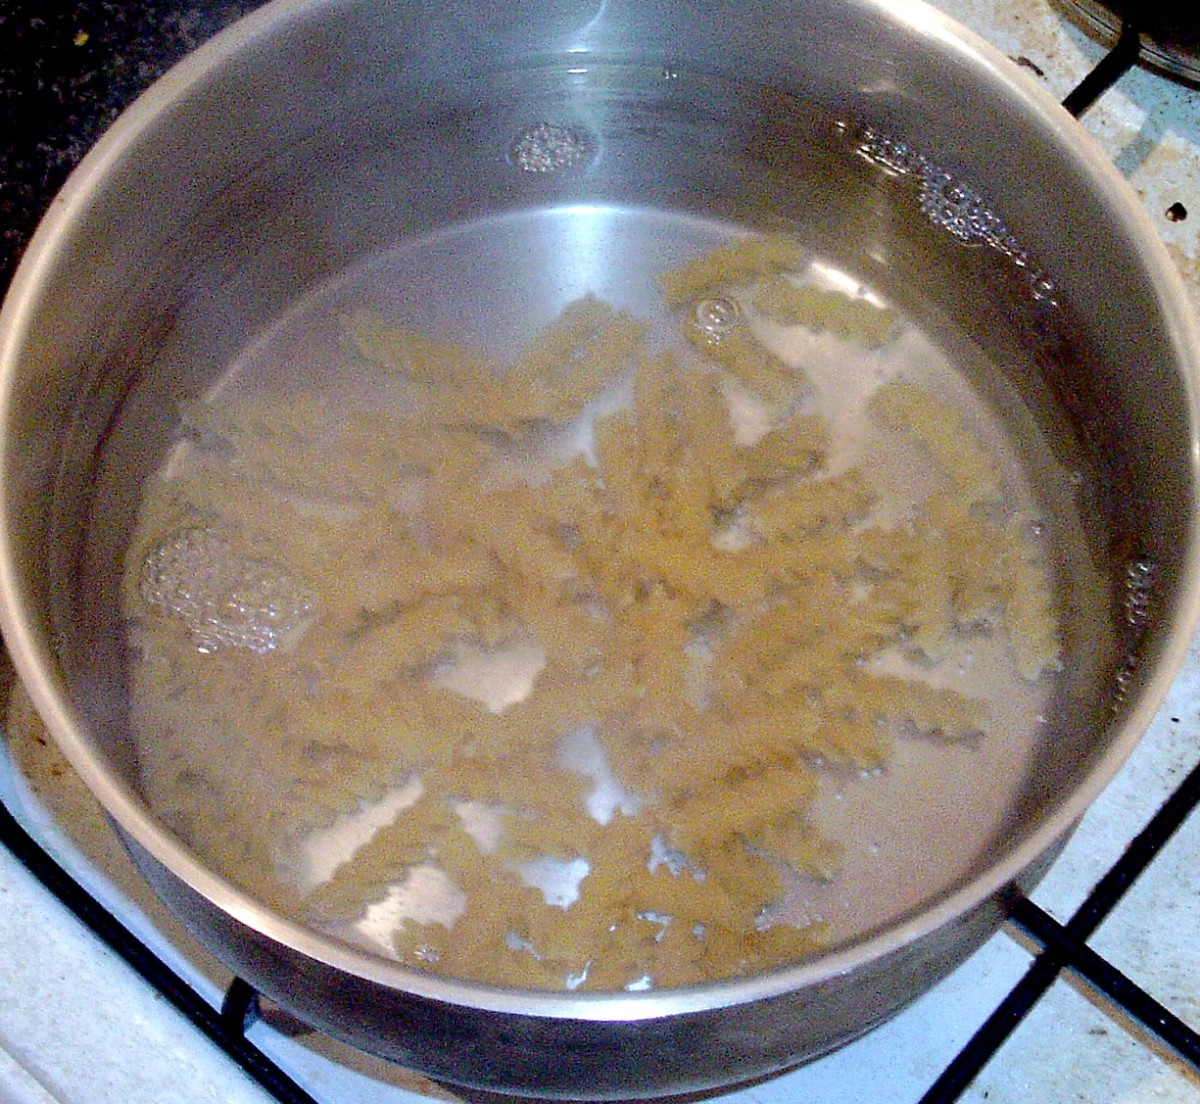 Fusilli pasta is added to boiling salted water